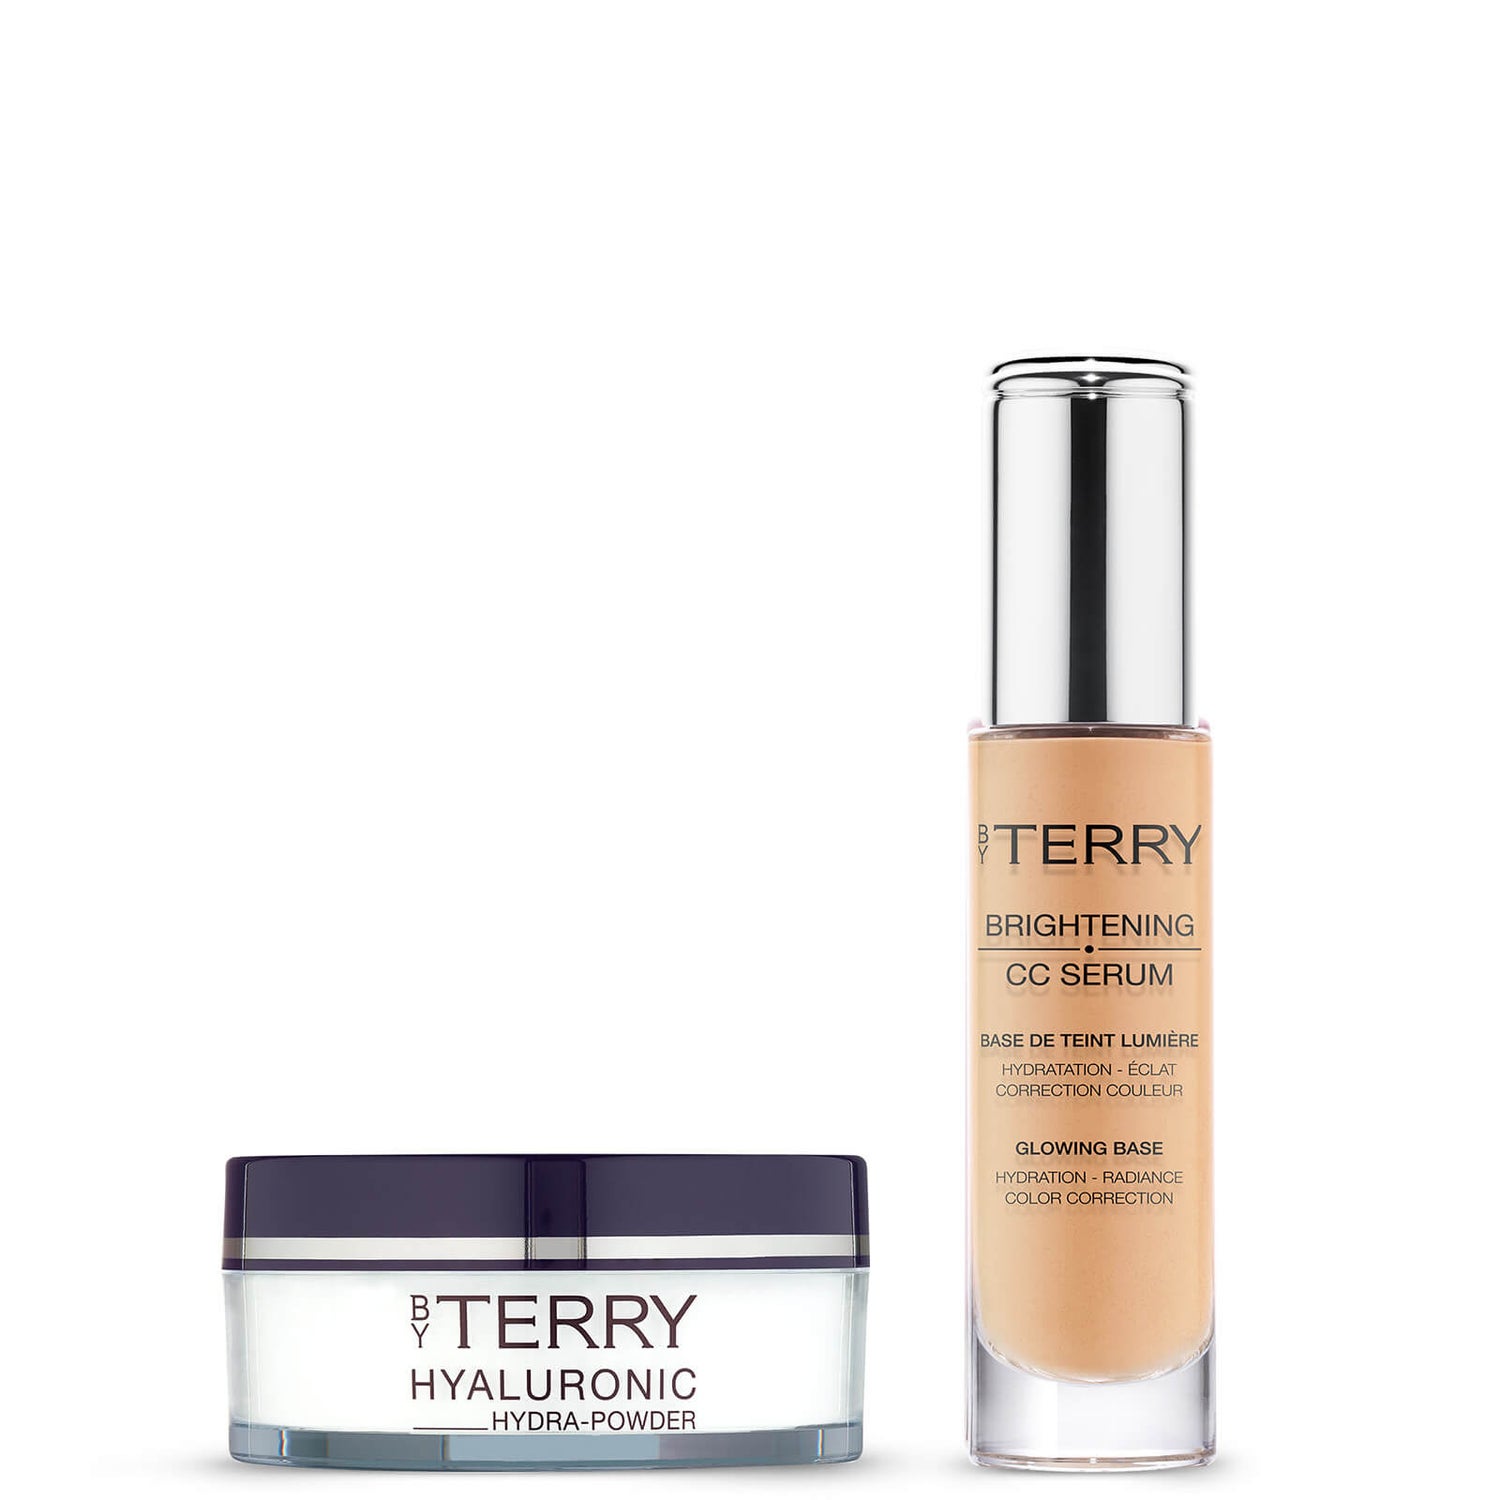 Siero CC Hyaluronic Hydra-Powder and Cellularose- No.3 Set Apricot Glow By Terry